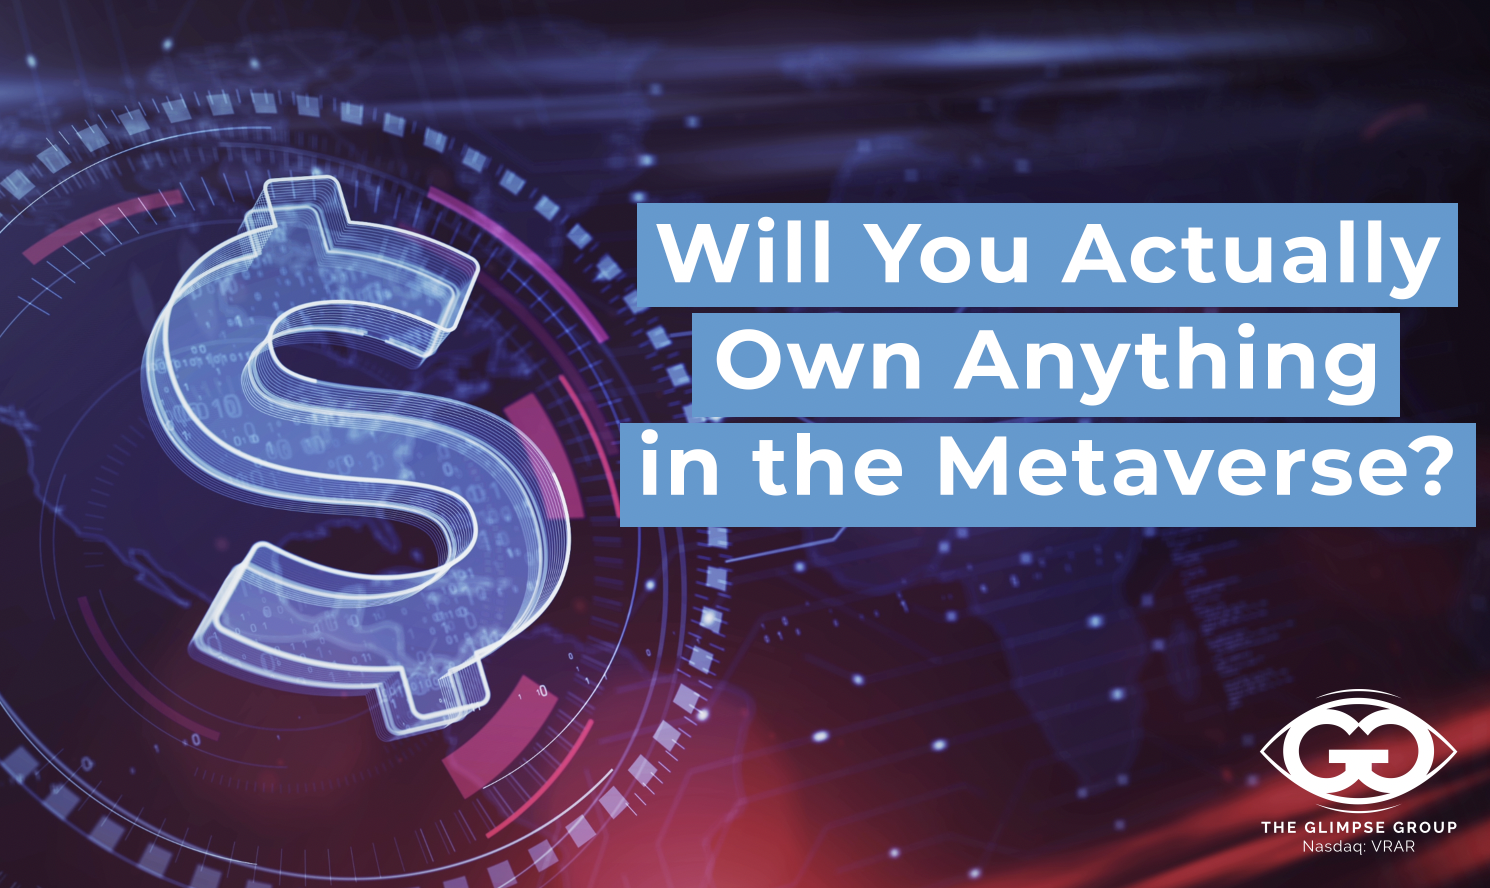 Will You Actually Own Anything in the Metaverse?